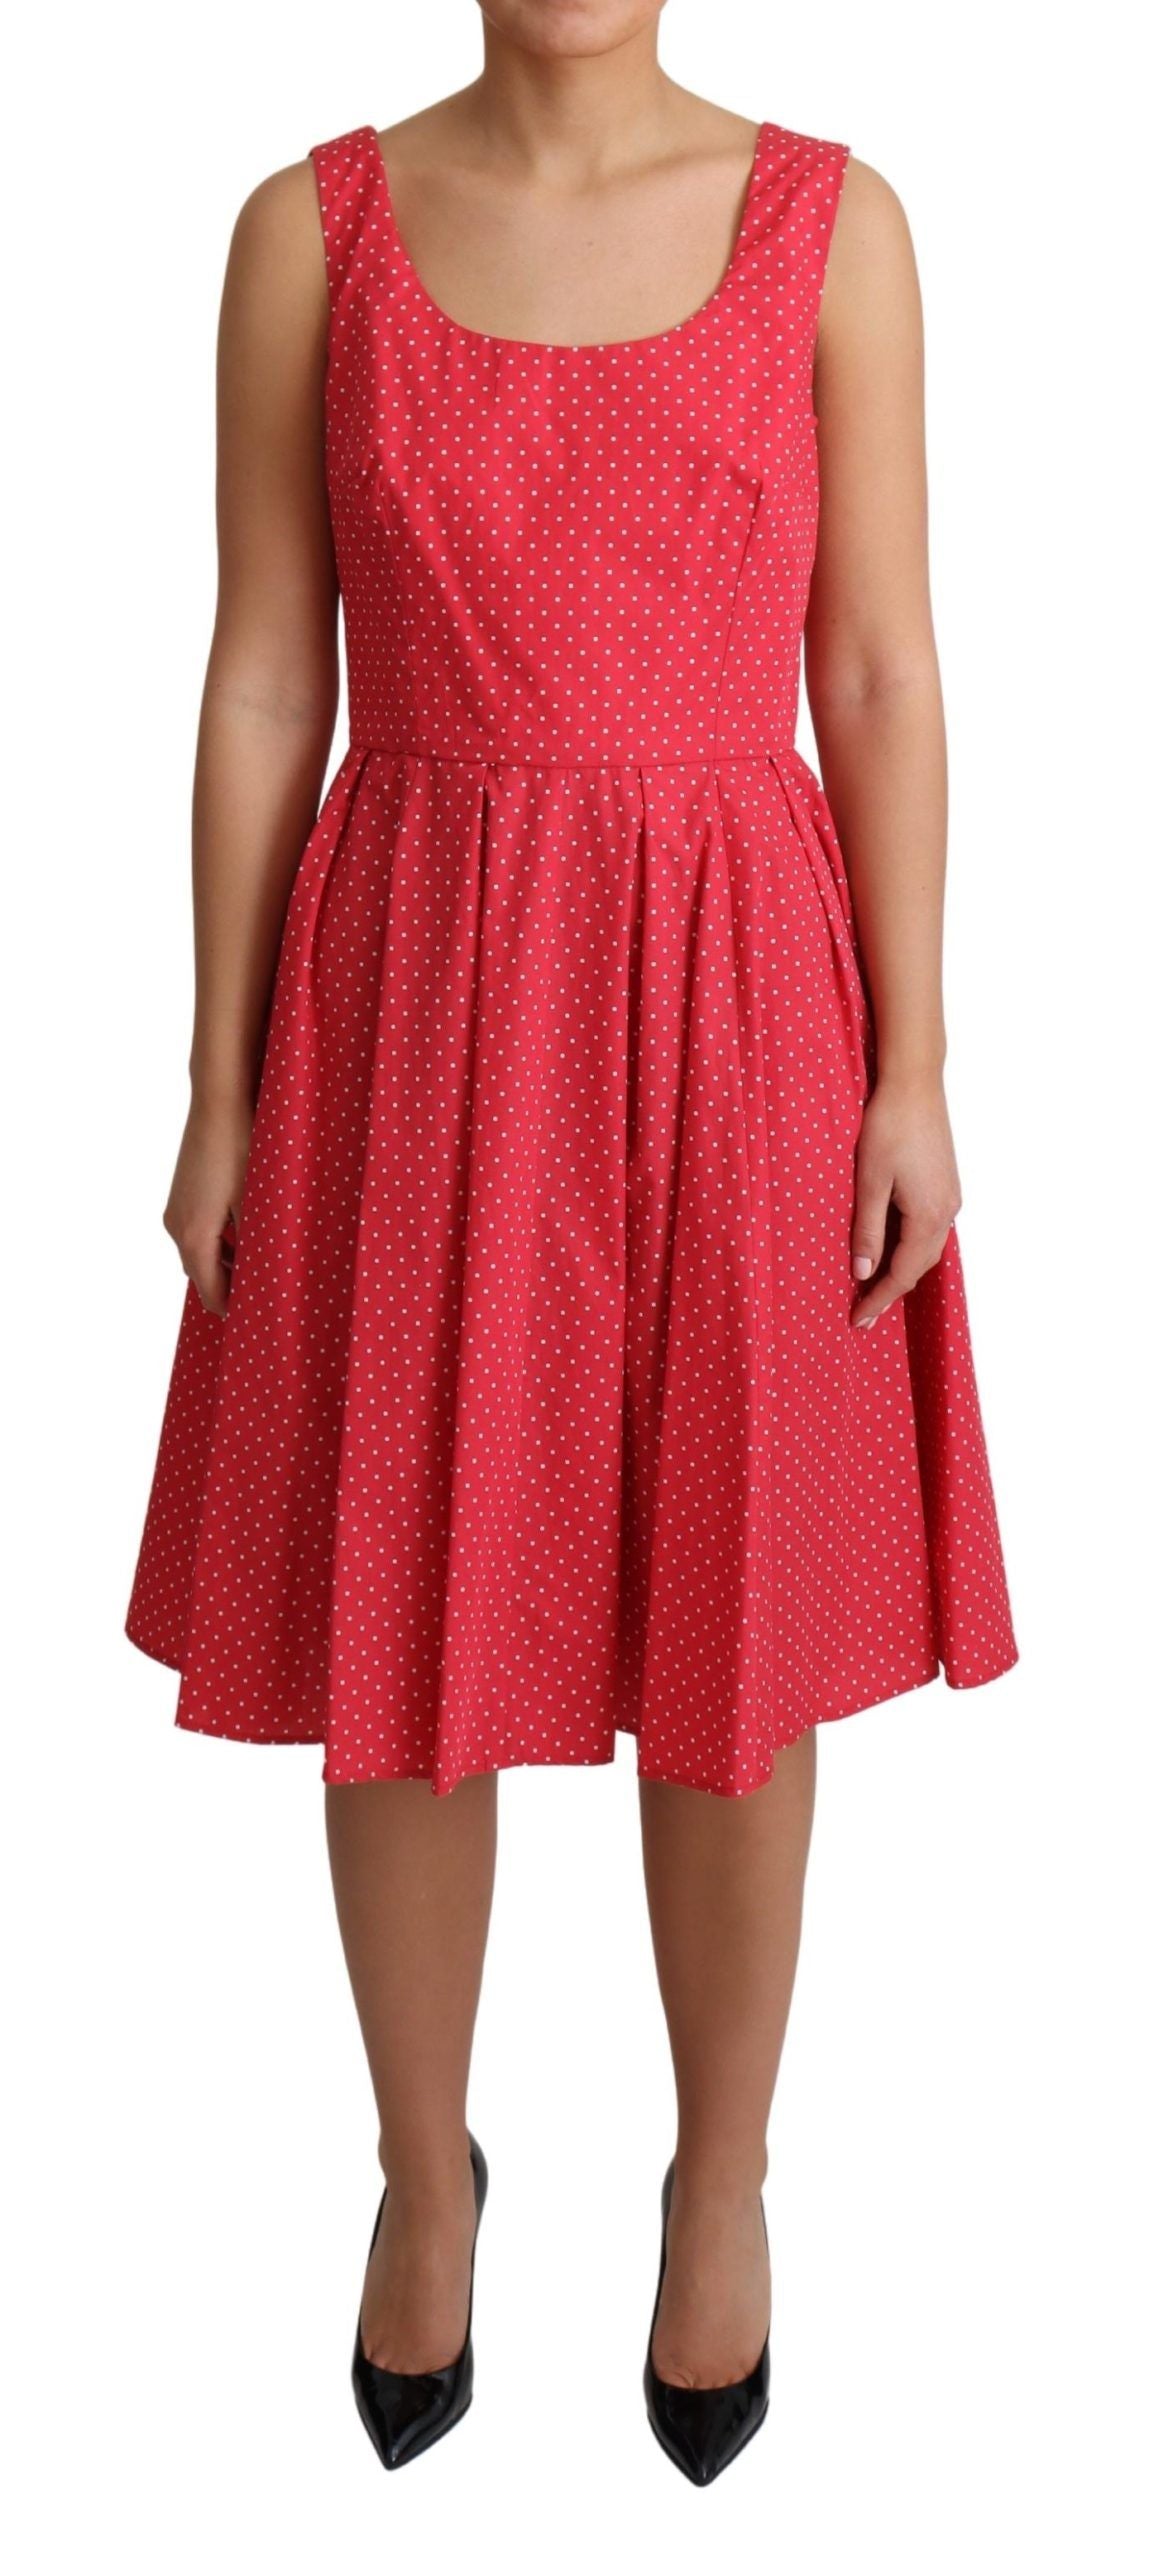 Red Polka Dotted Cotton A-Line Dress